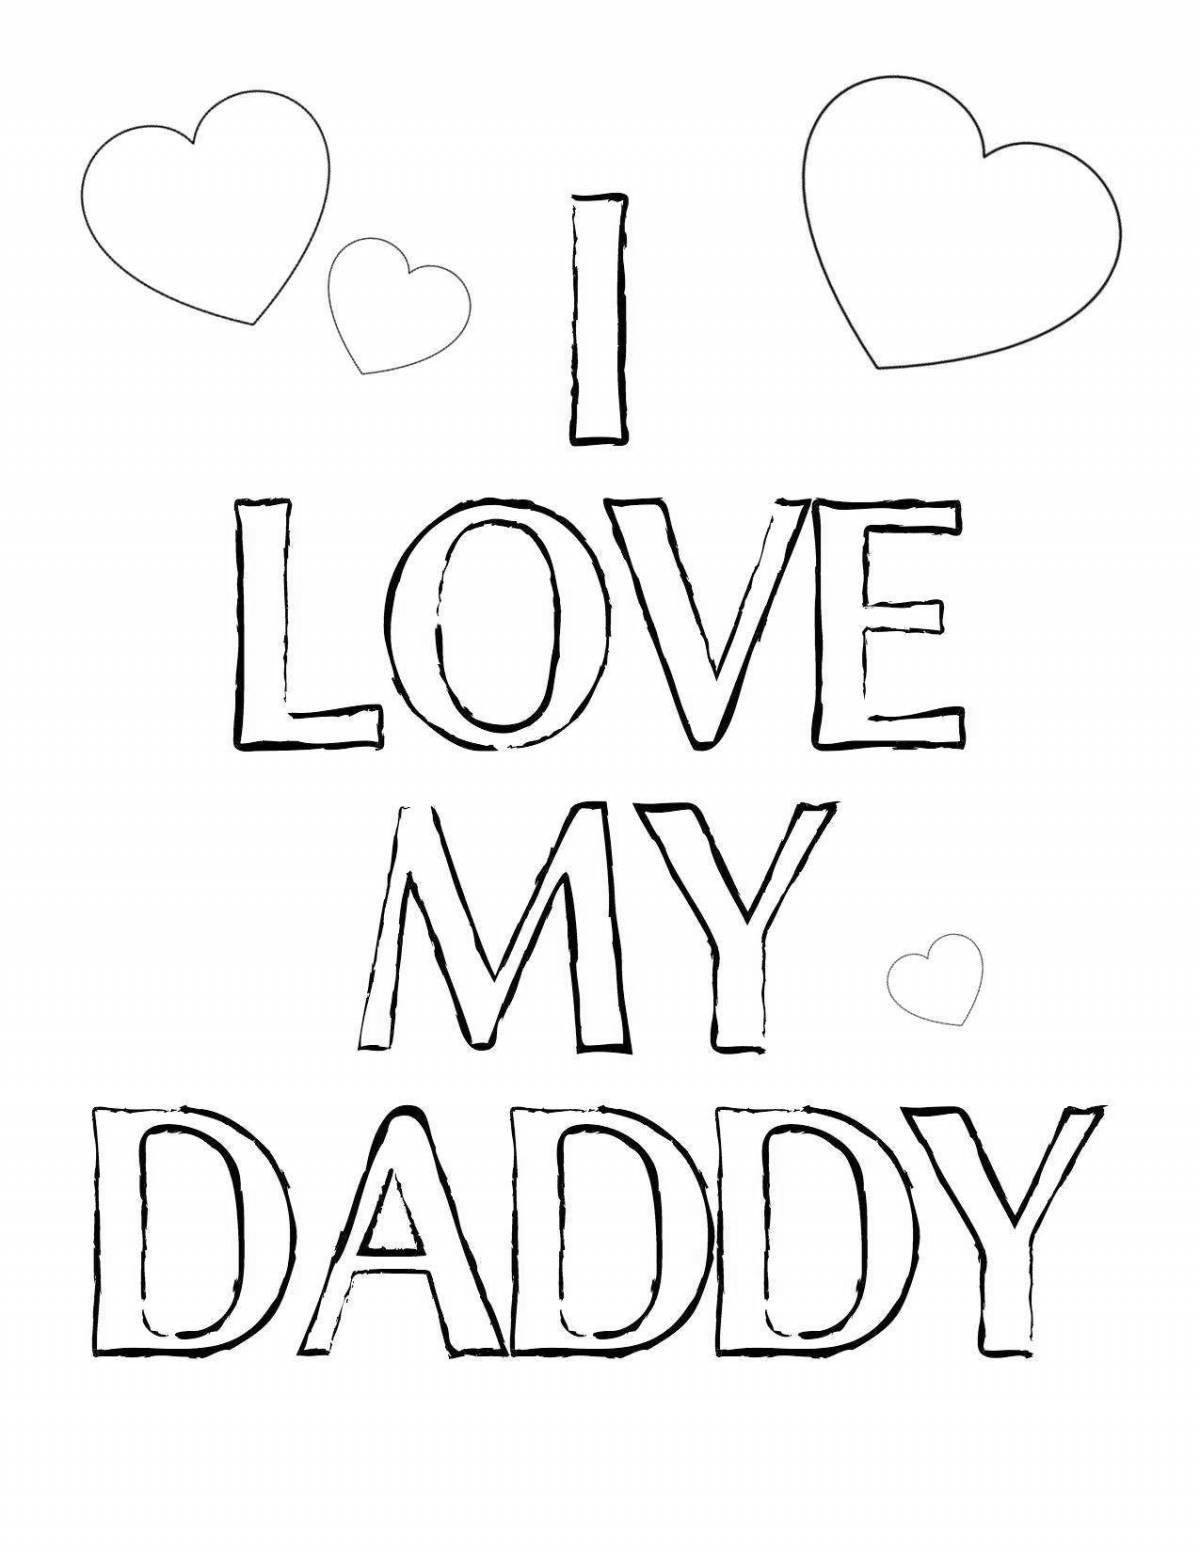 I love you dad holiday coloring page